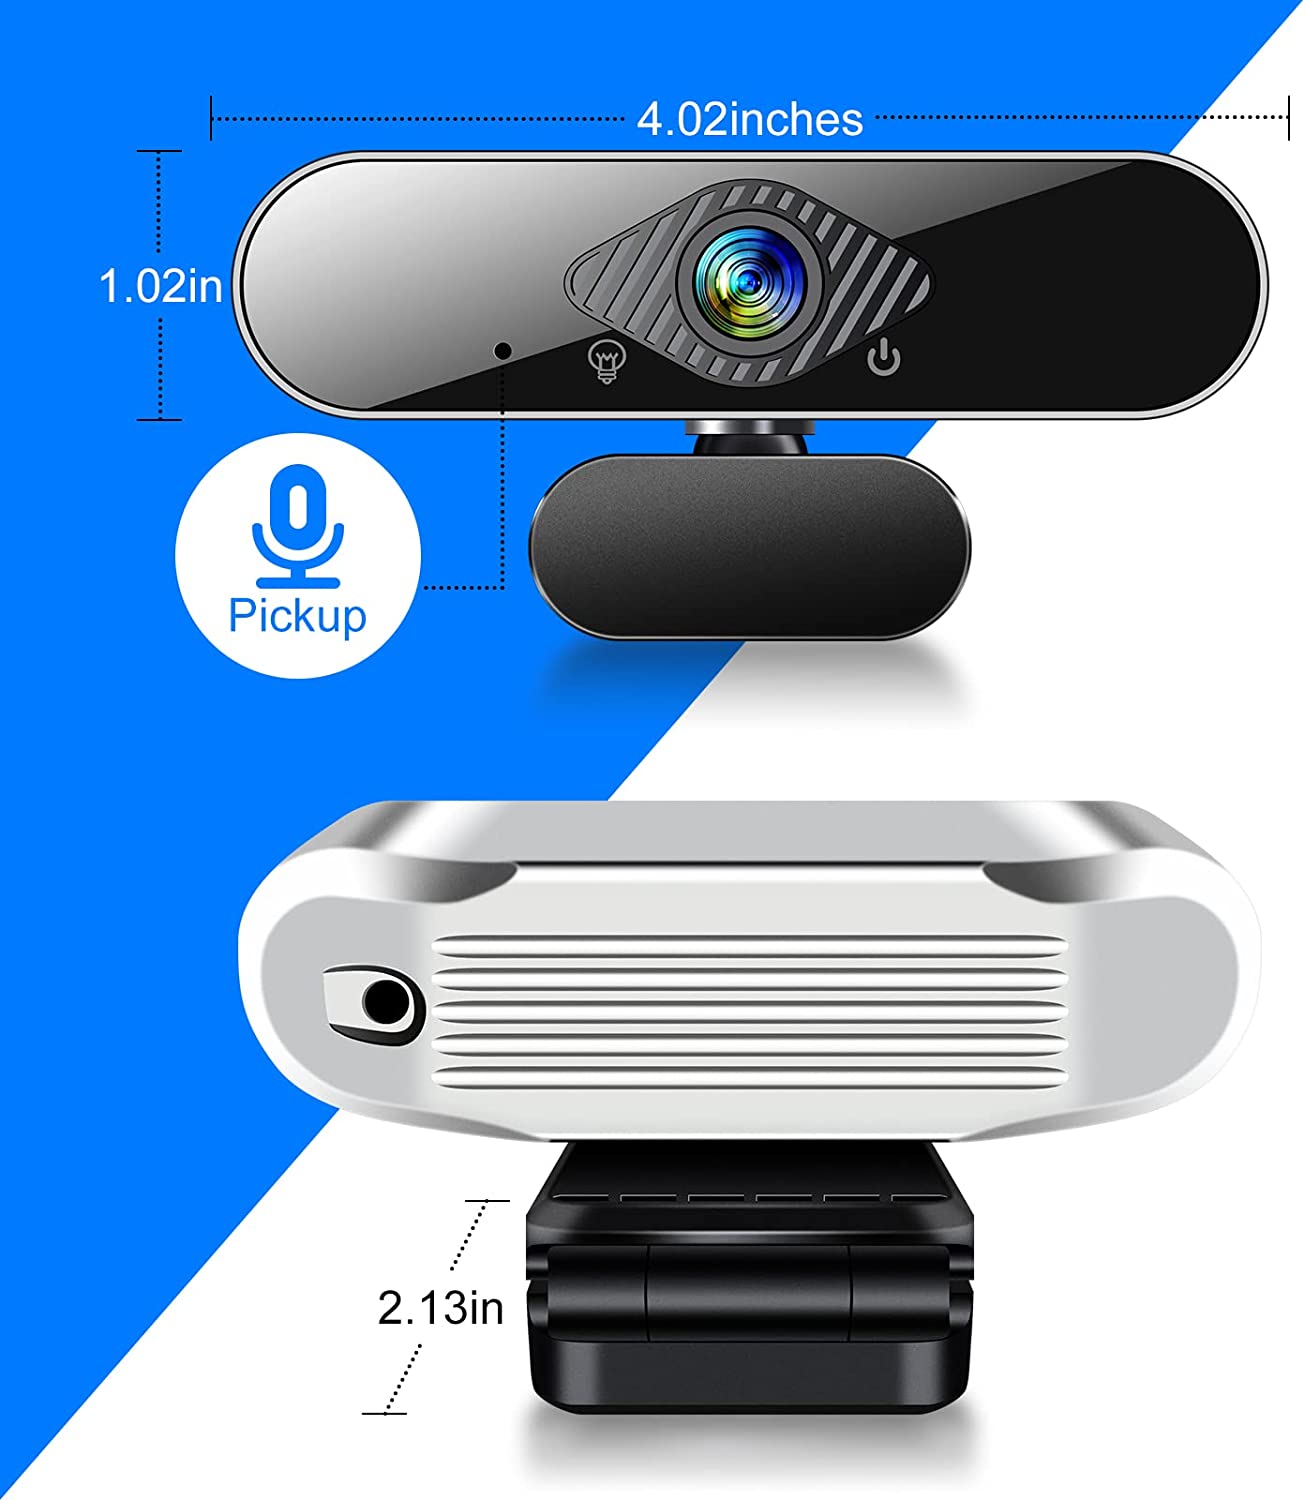 1080P HD Webcam with Microphone, Computer USB Web Camera at 1080P/30fps, 100 Wide Angles View, Plug and Play, Works with Skype, Zoom, FaceTime, Hangouts, PC/Mac/Laptop/MacBook/Tablet by FUMAX